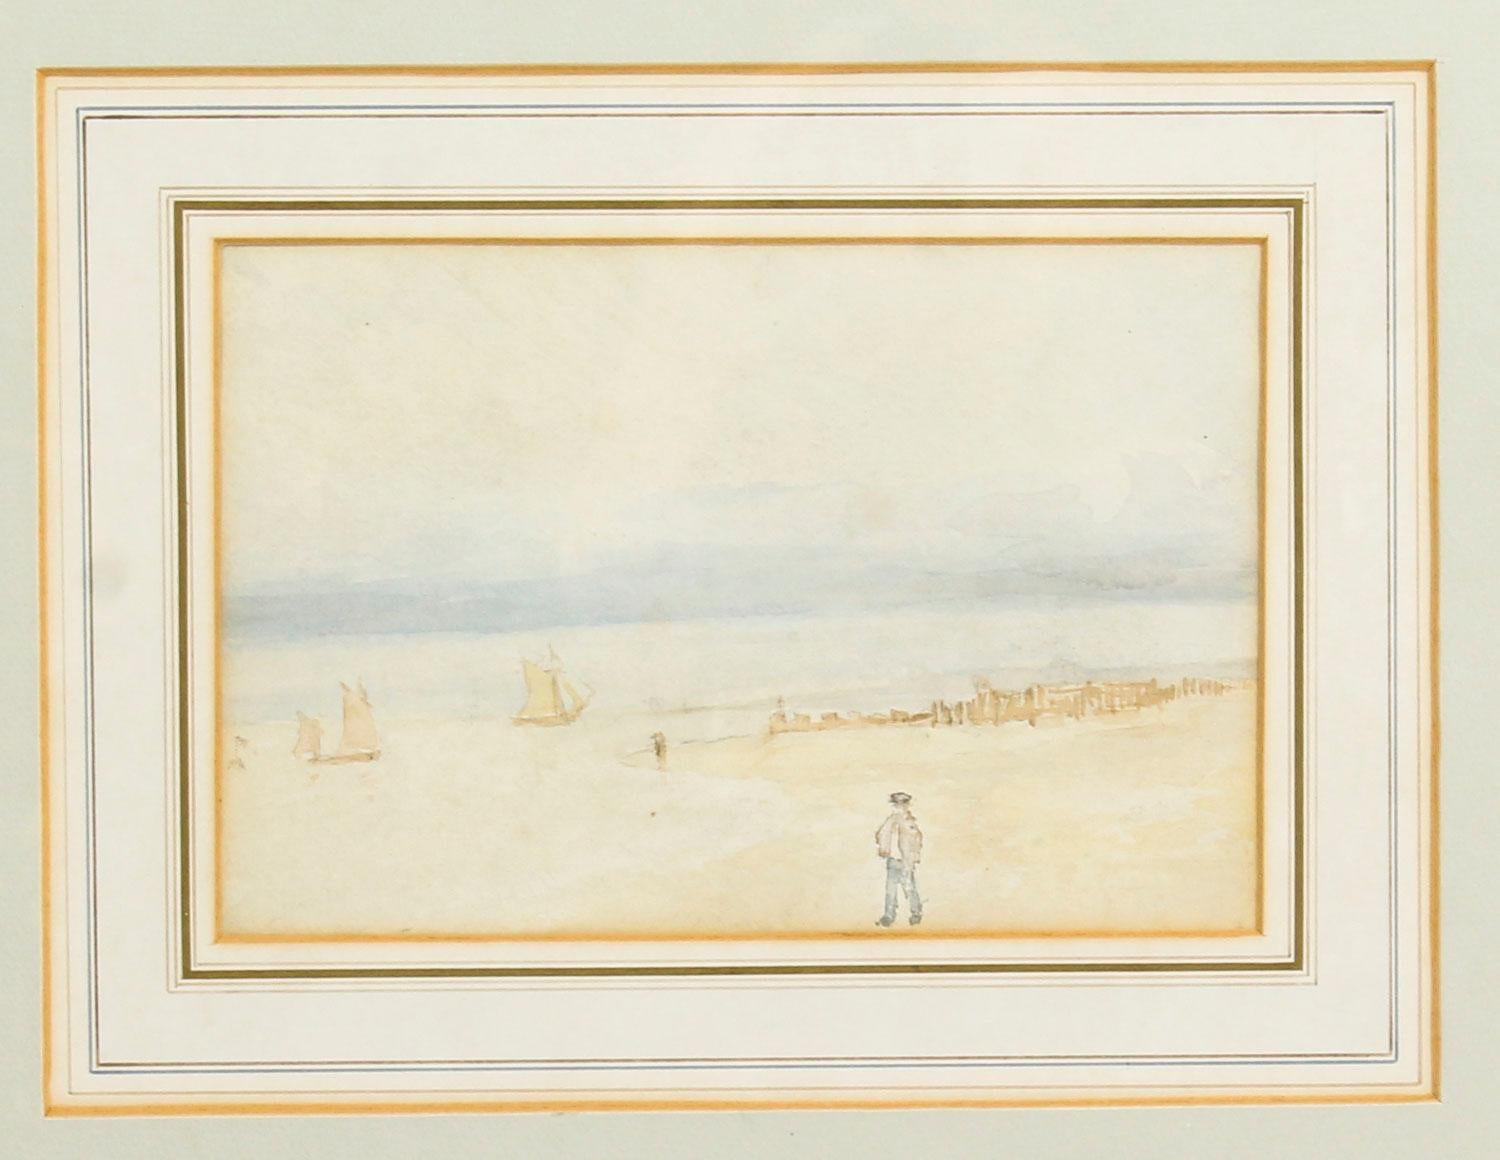 This is a beautiful antique watercolor of a view from the beach overlooking the ocean by R. E. Walker, circa 1880 in date.

The watercolor features a distant view of sailboats at sea with a figure walking along the beach in the foreground.
